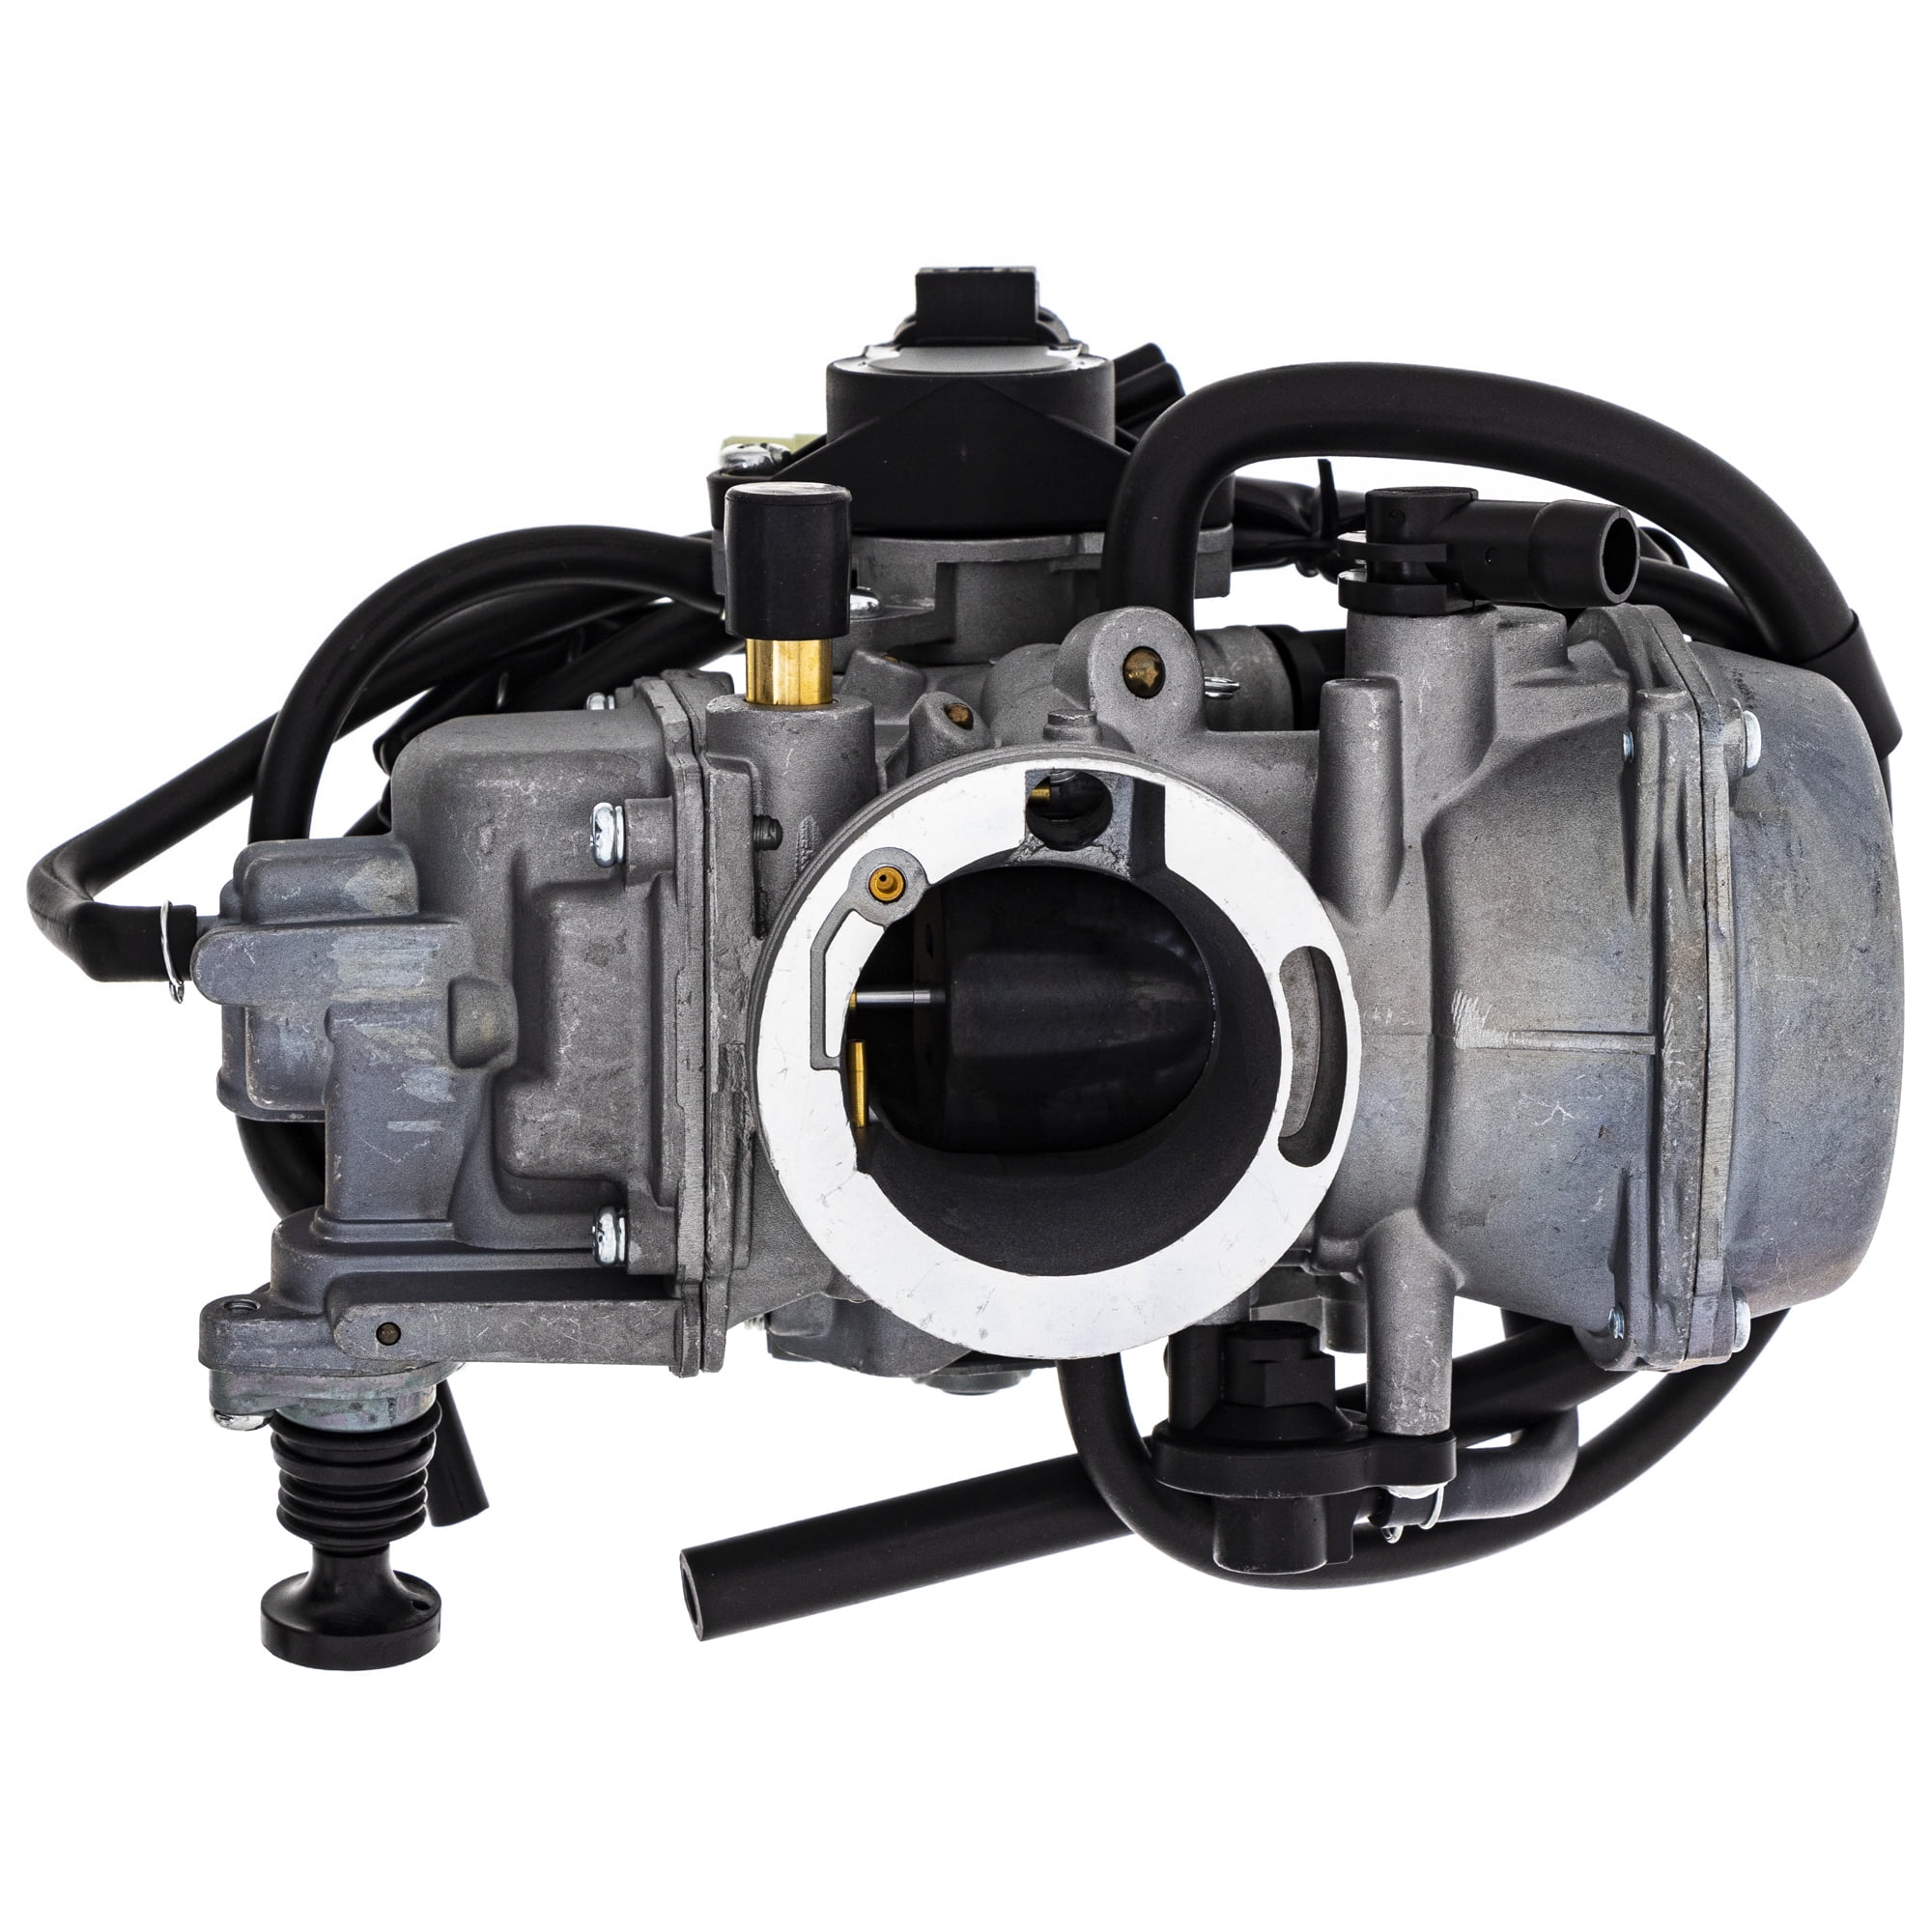 Honda Rincon 650 FA 03 Carburetor carb 16100-HN8-013 44296 - Power Sports  Nation: The Cheapest Used ATV and Side by Side Parts